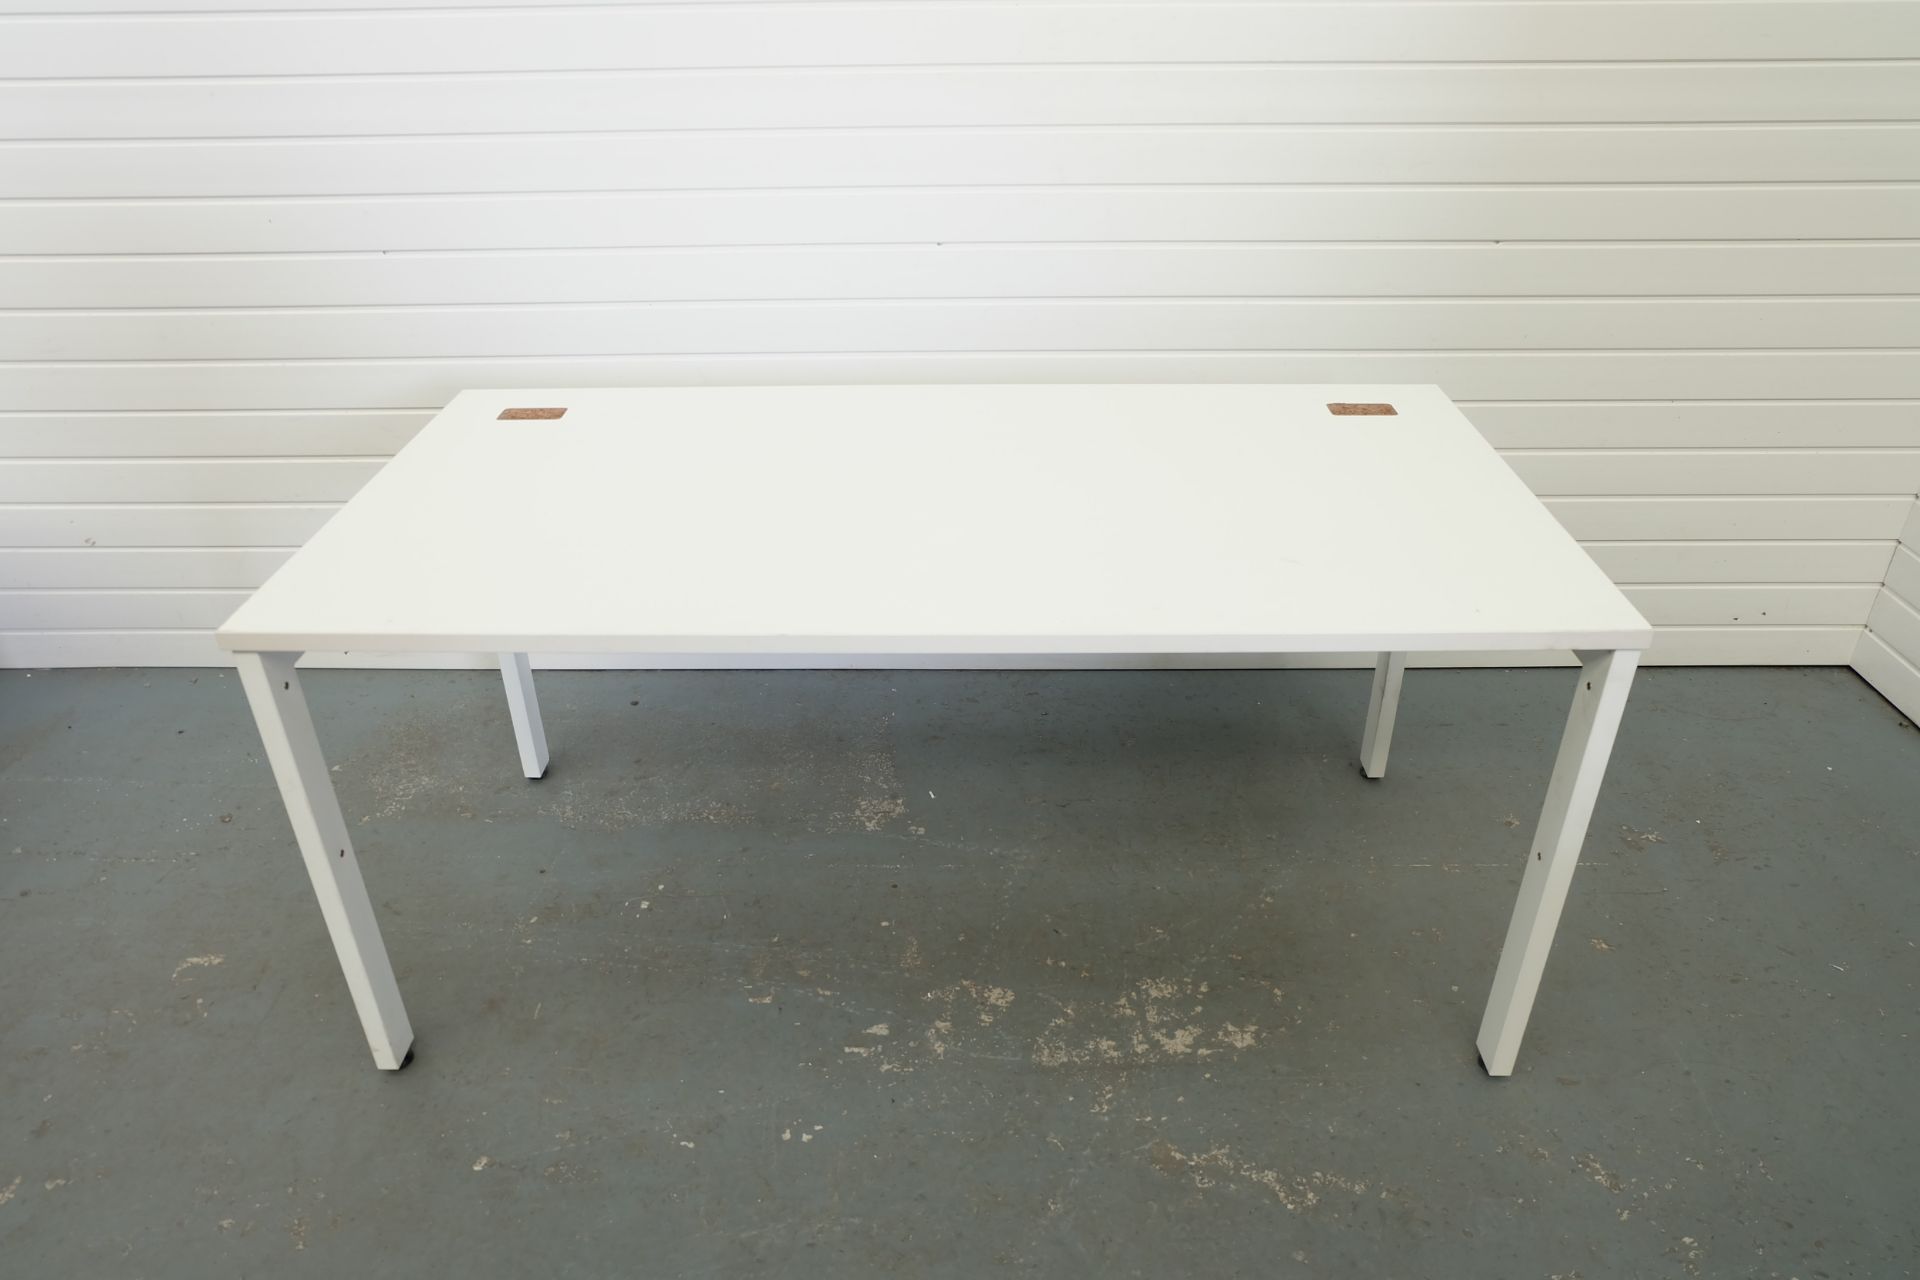 White Desk With Metal Legs and Adjustable Feet. 2 x Holes for Wires. Size 1600mm x 800mm x 730mm Hig